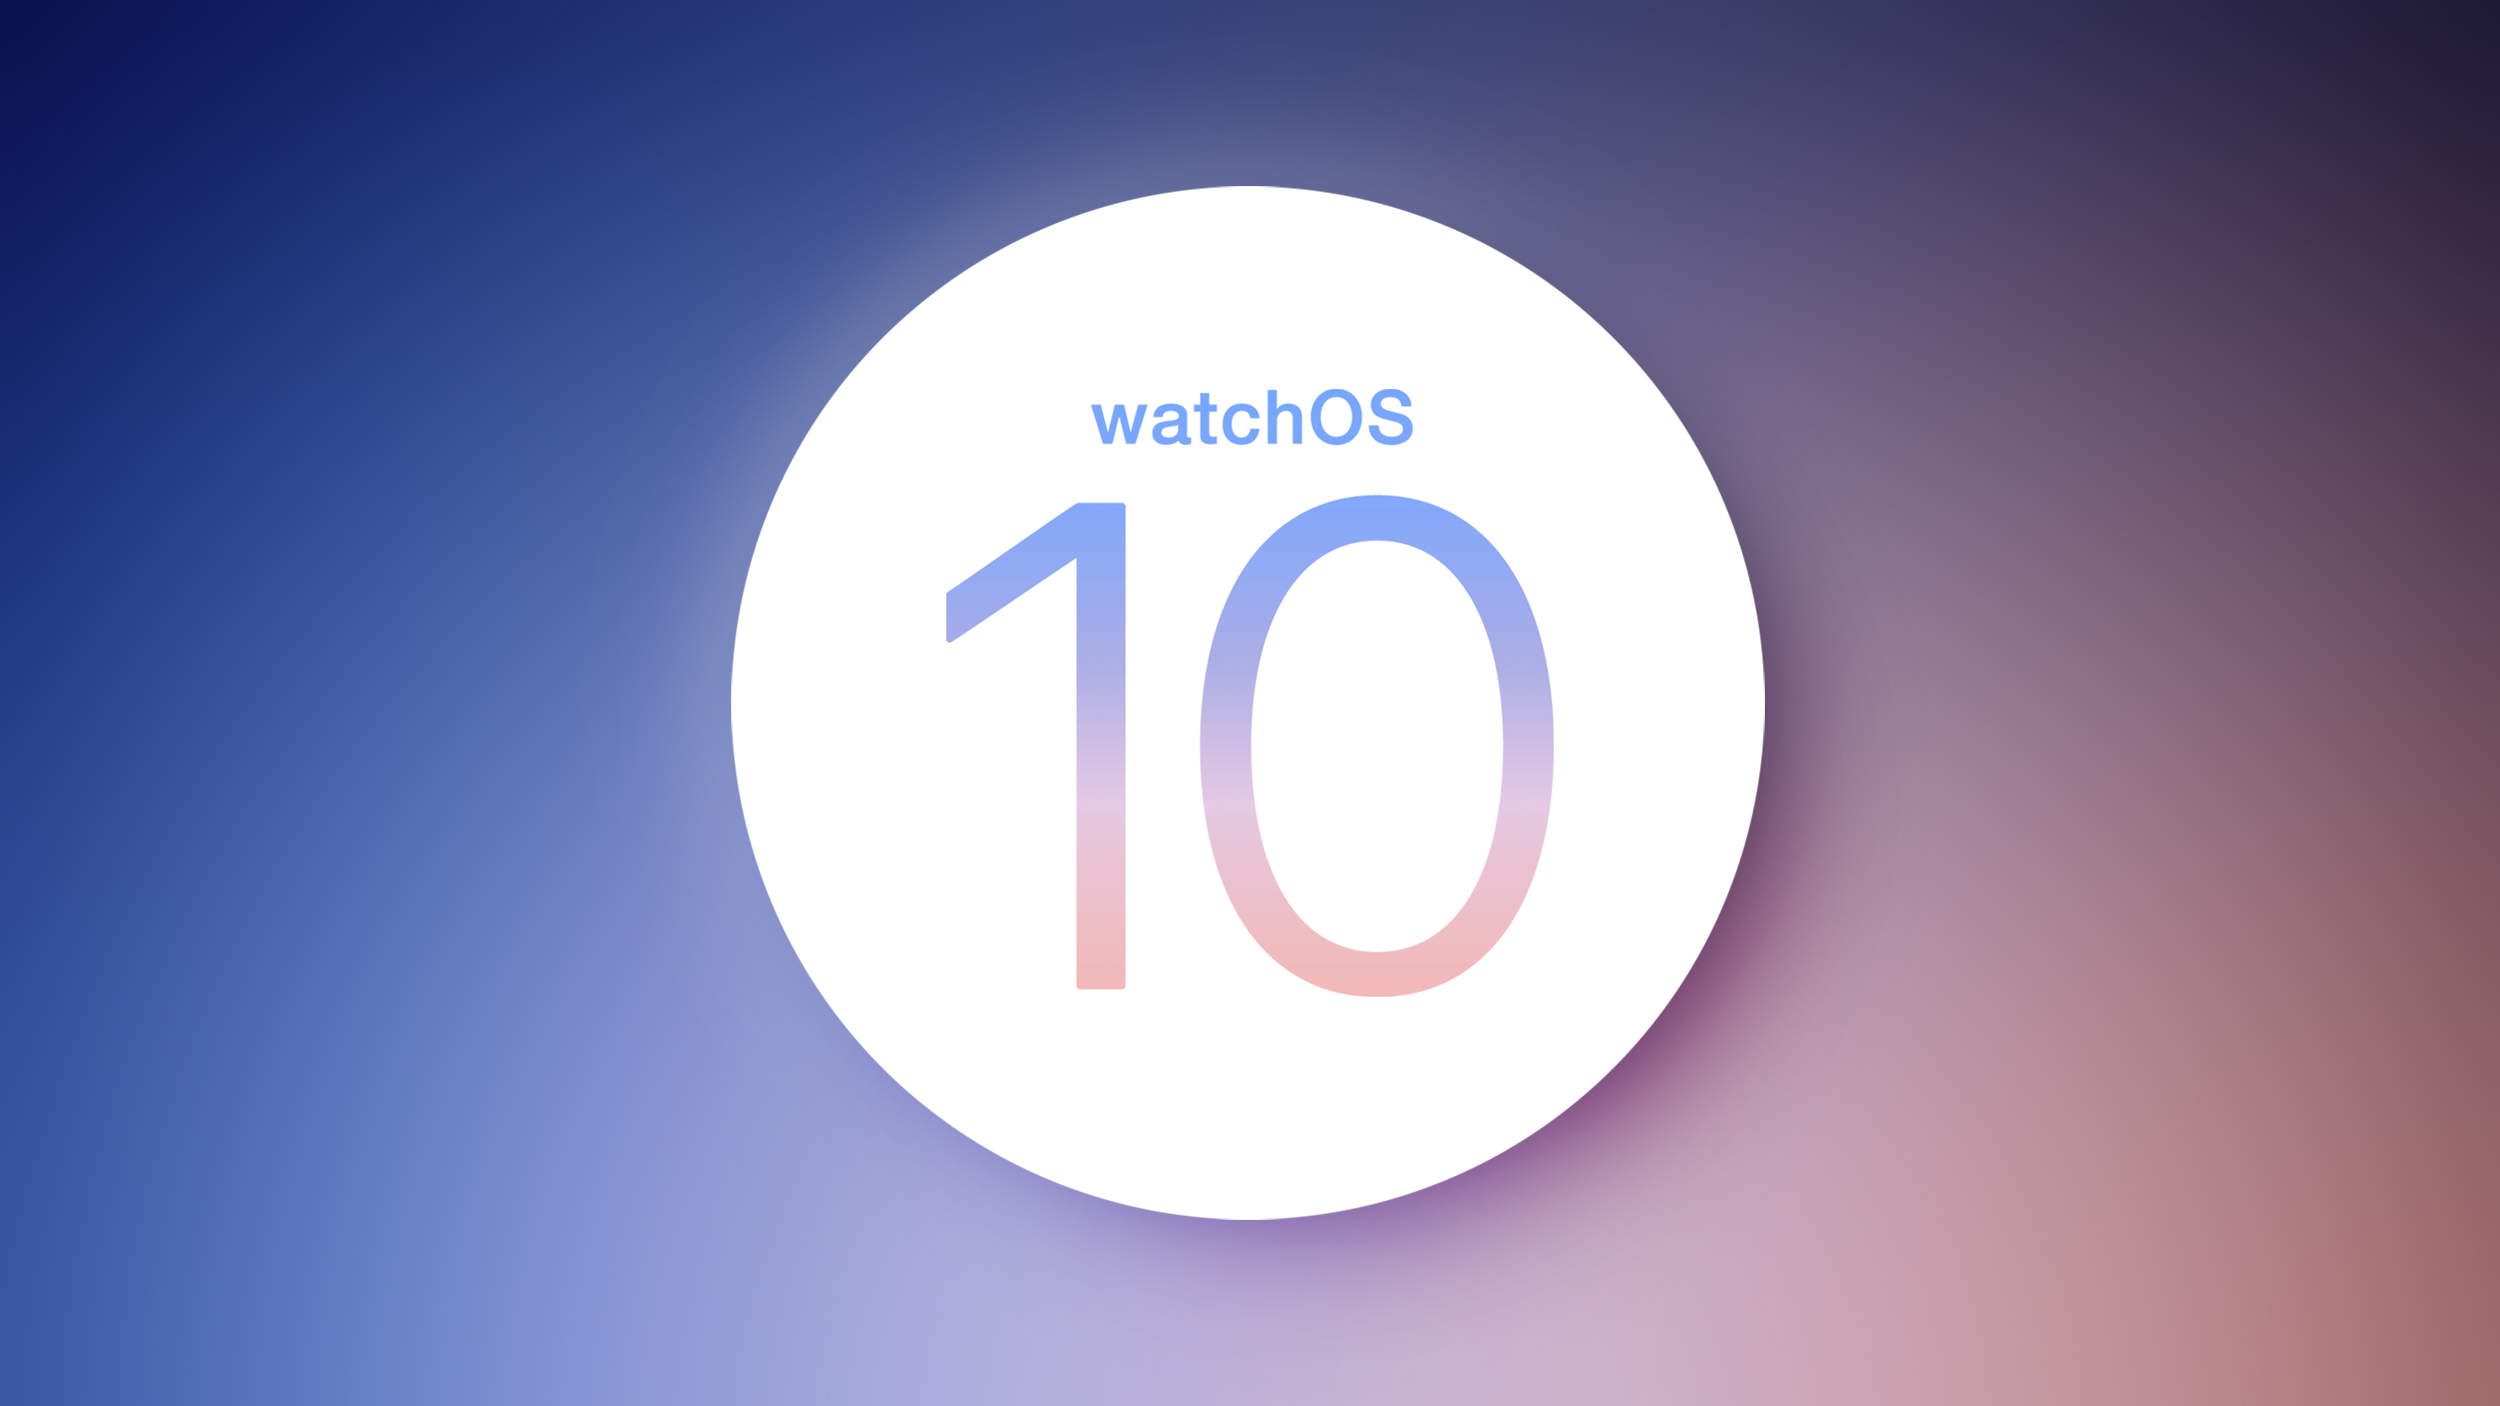 Gurman: Widgets to Be ‘Central Part’ of watchOS 10’s Interface